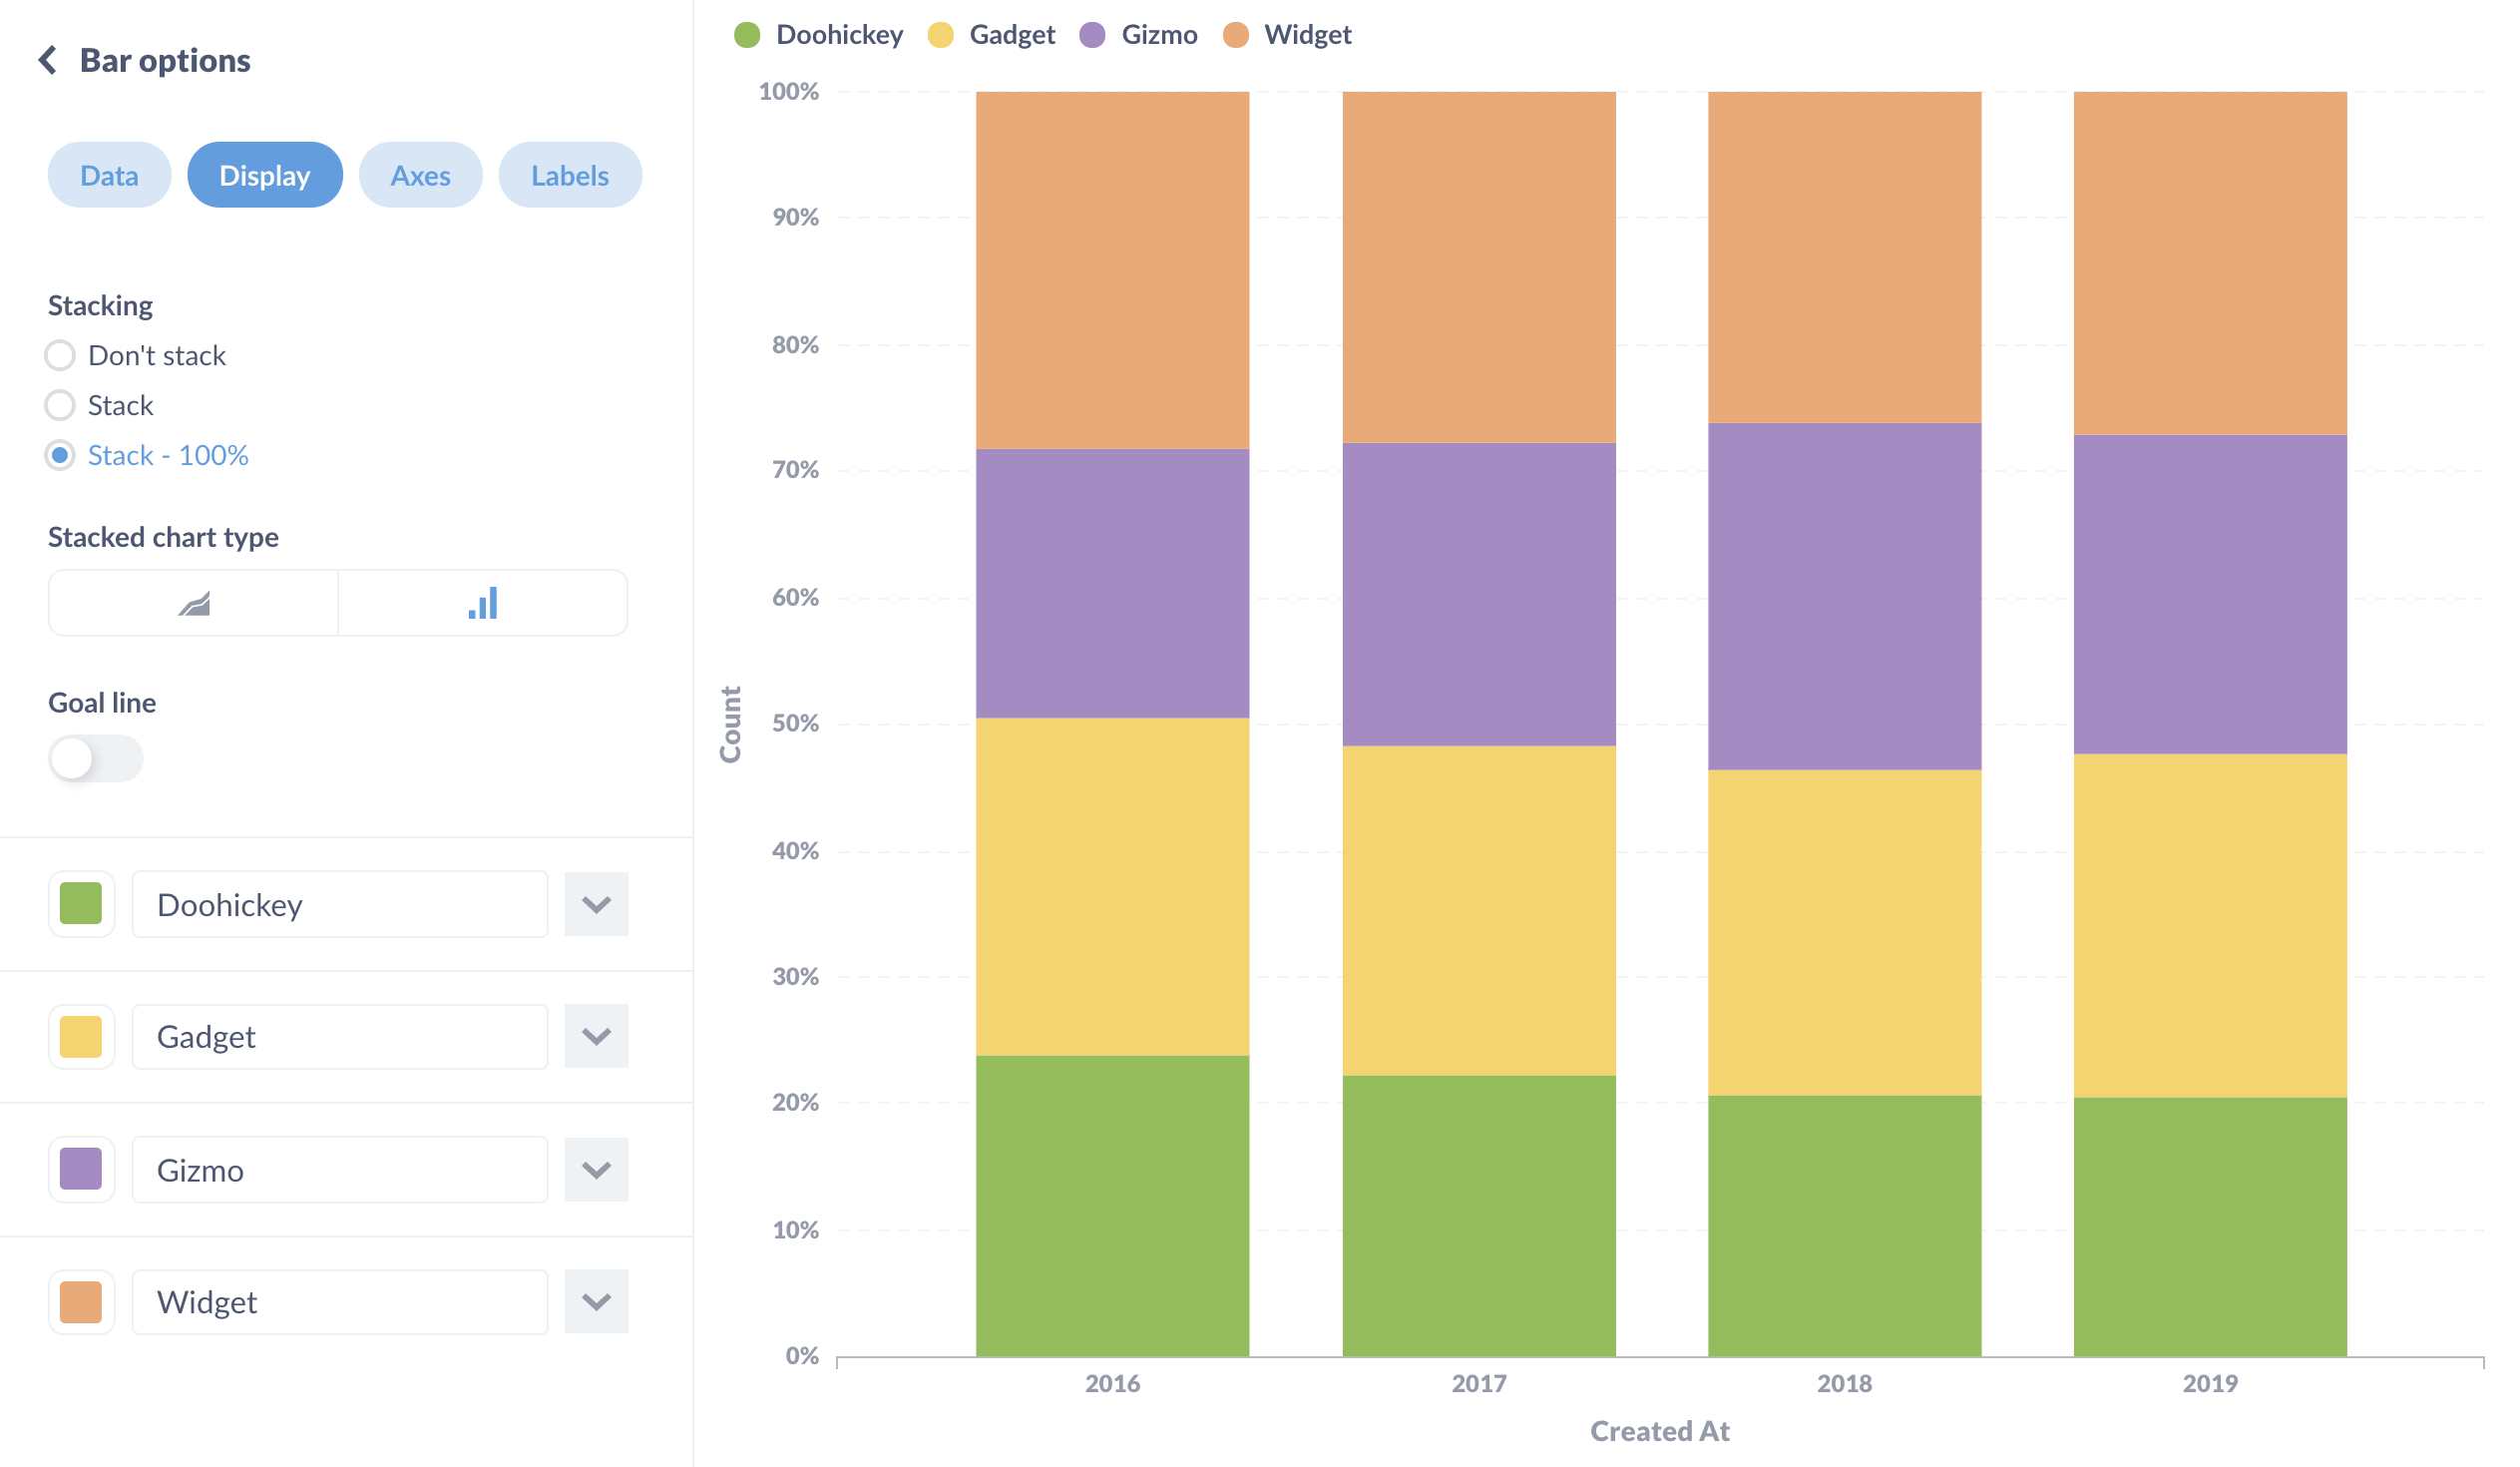 Stacked bar chart at 100% showing orders grouped by category per year.